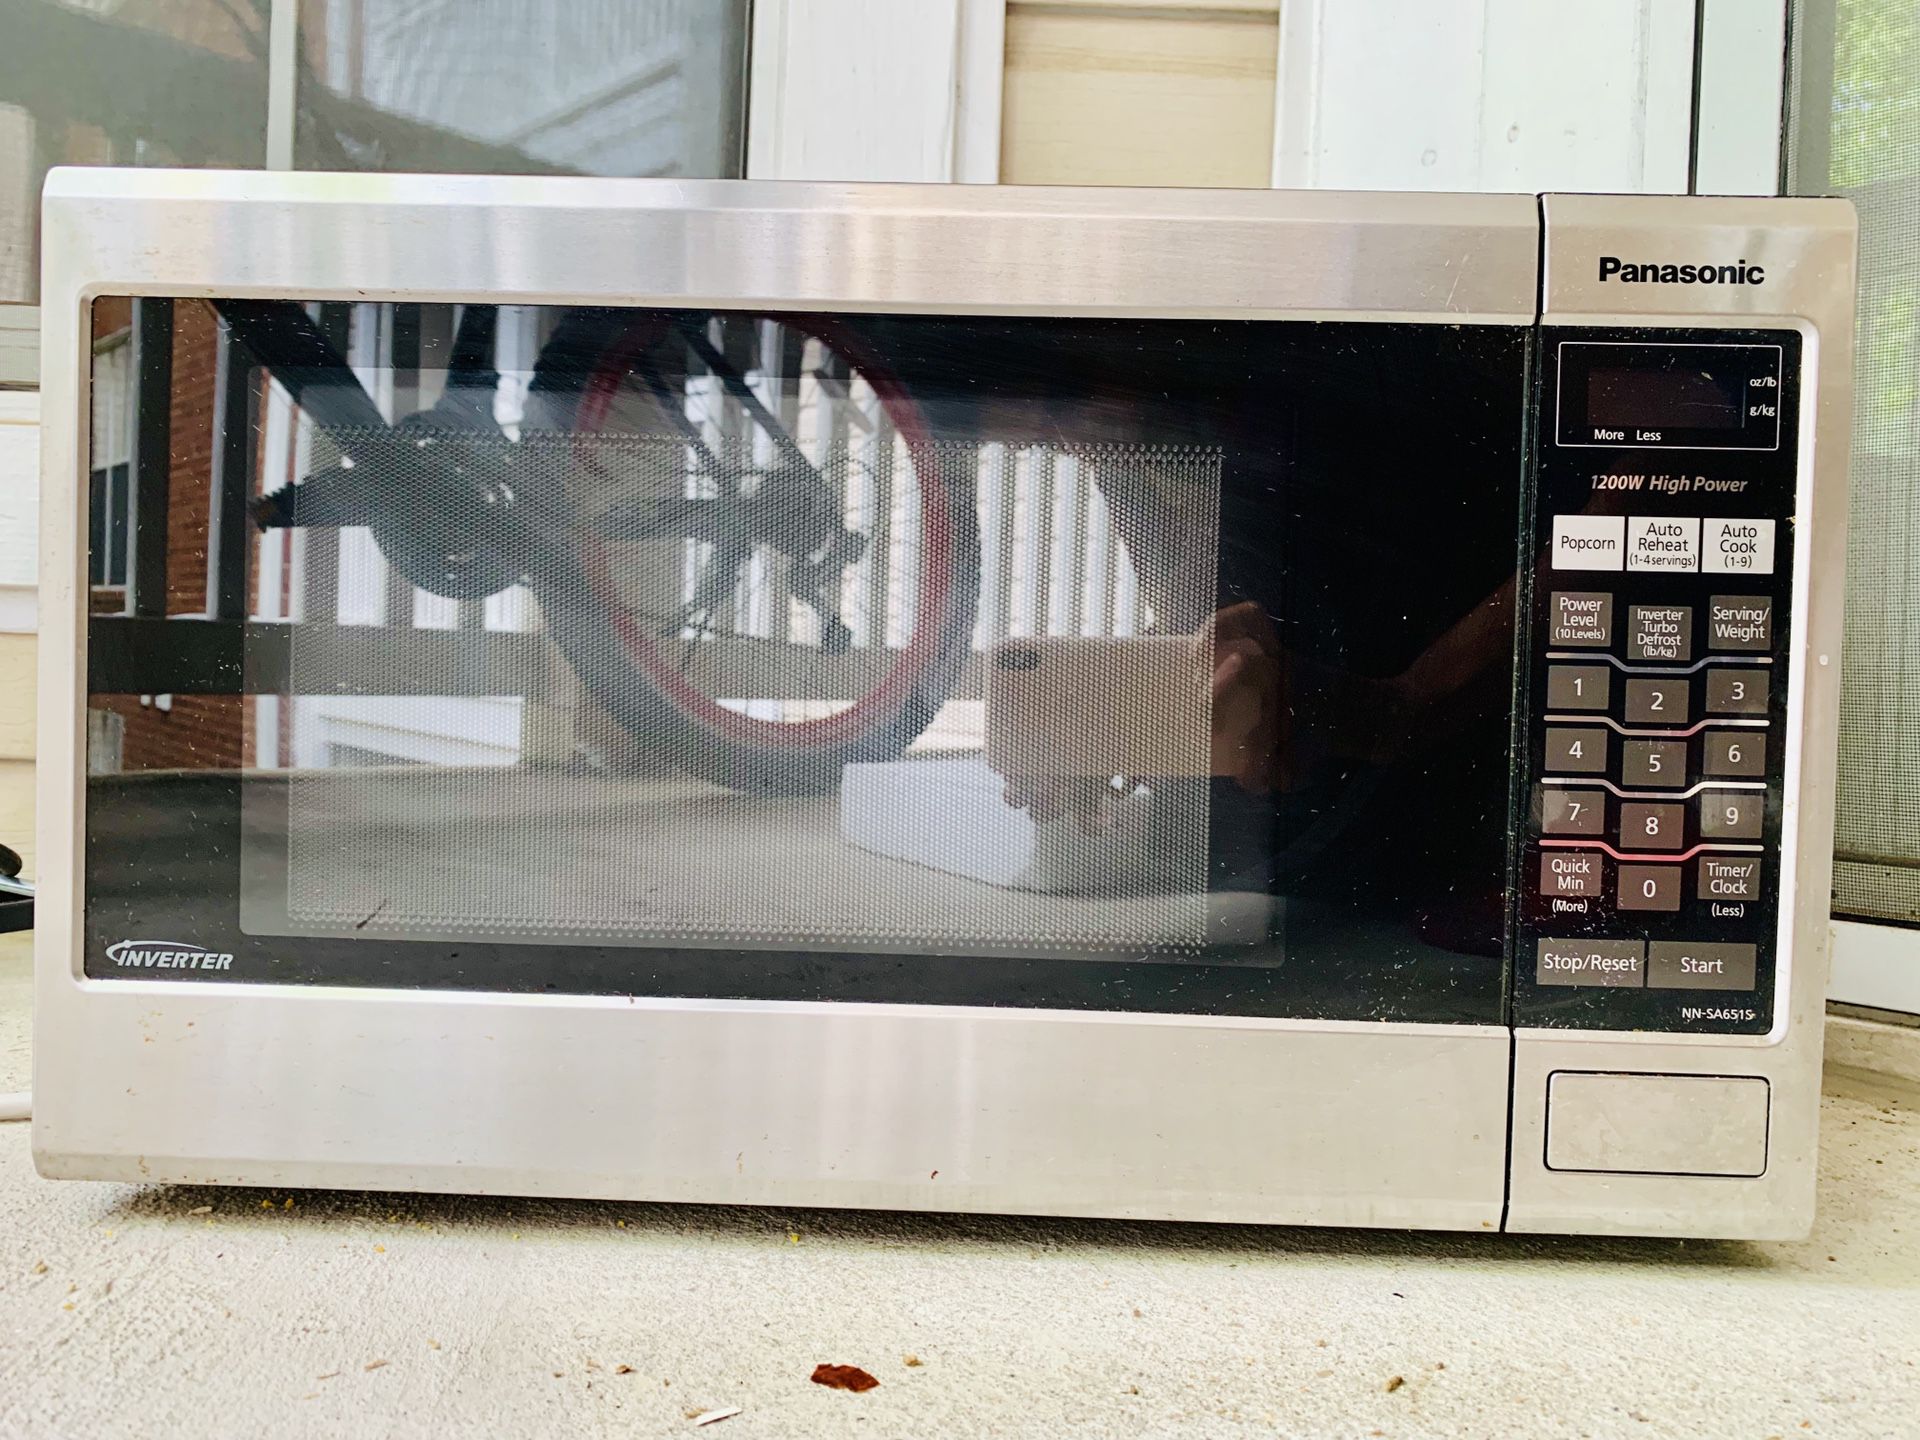 Used Panasonic Microwave for $38 available in good condition